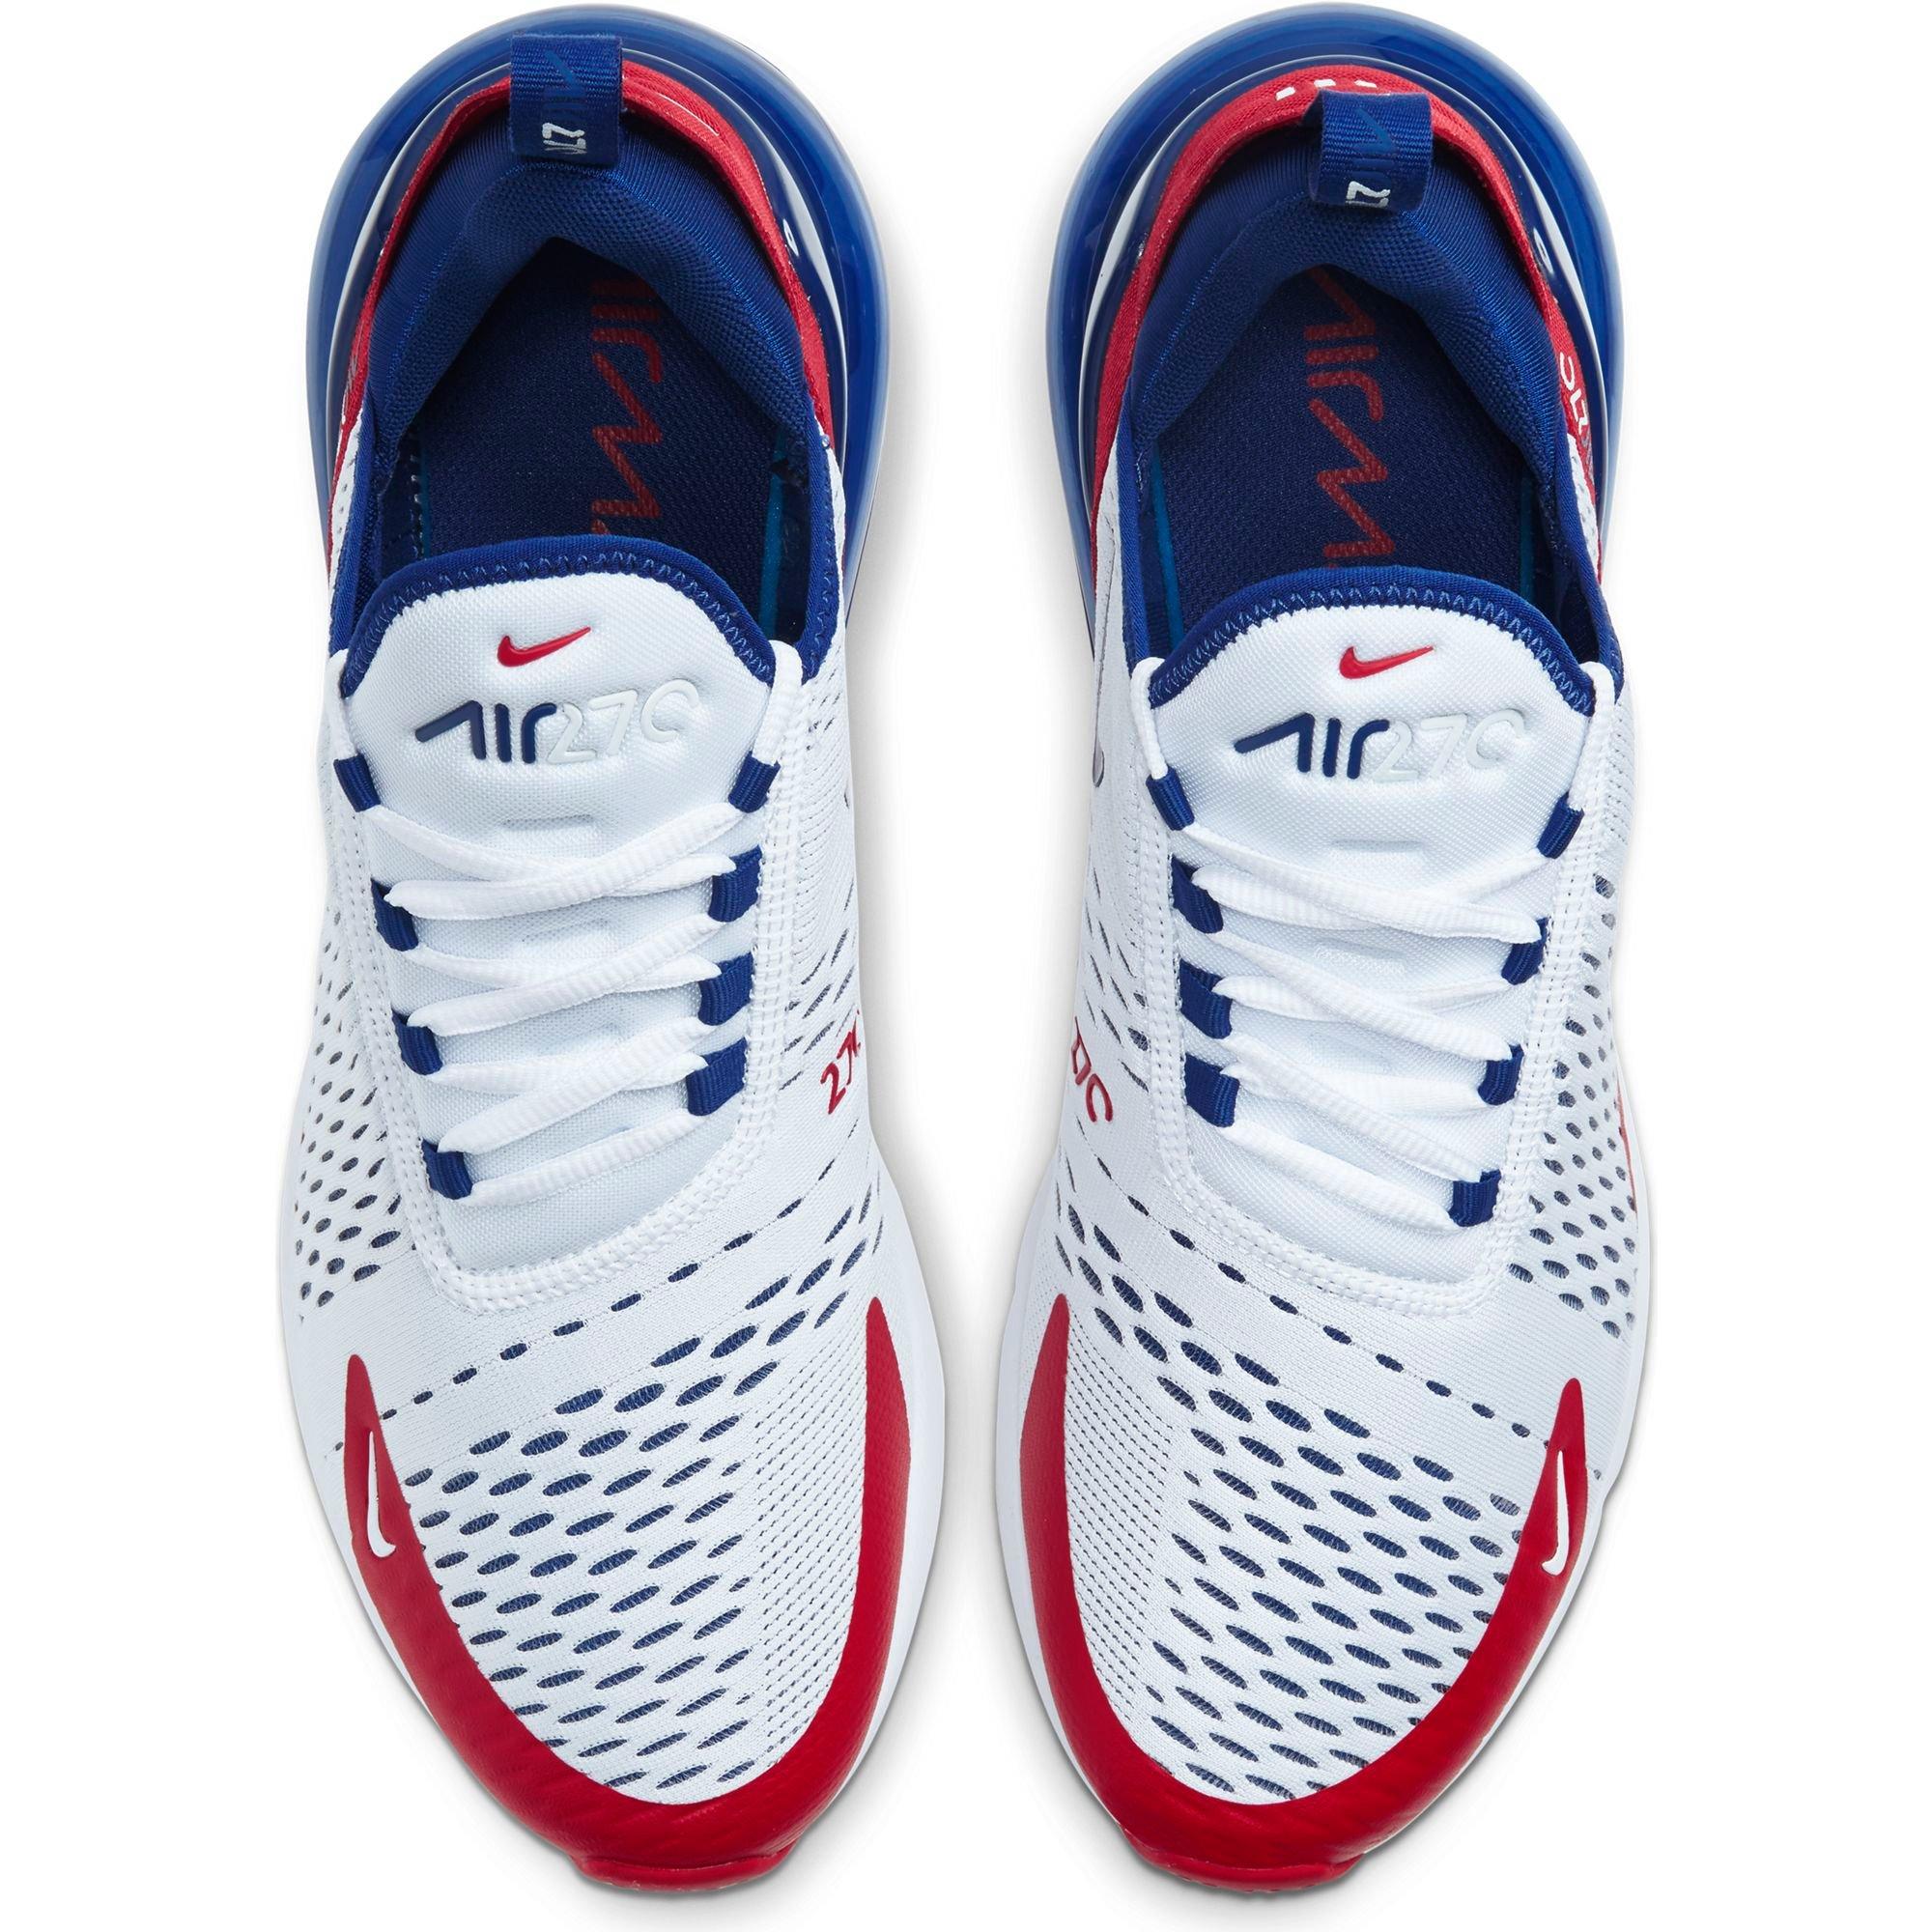 red white and royal blue air max